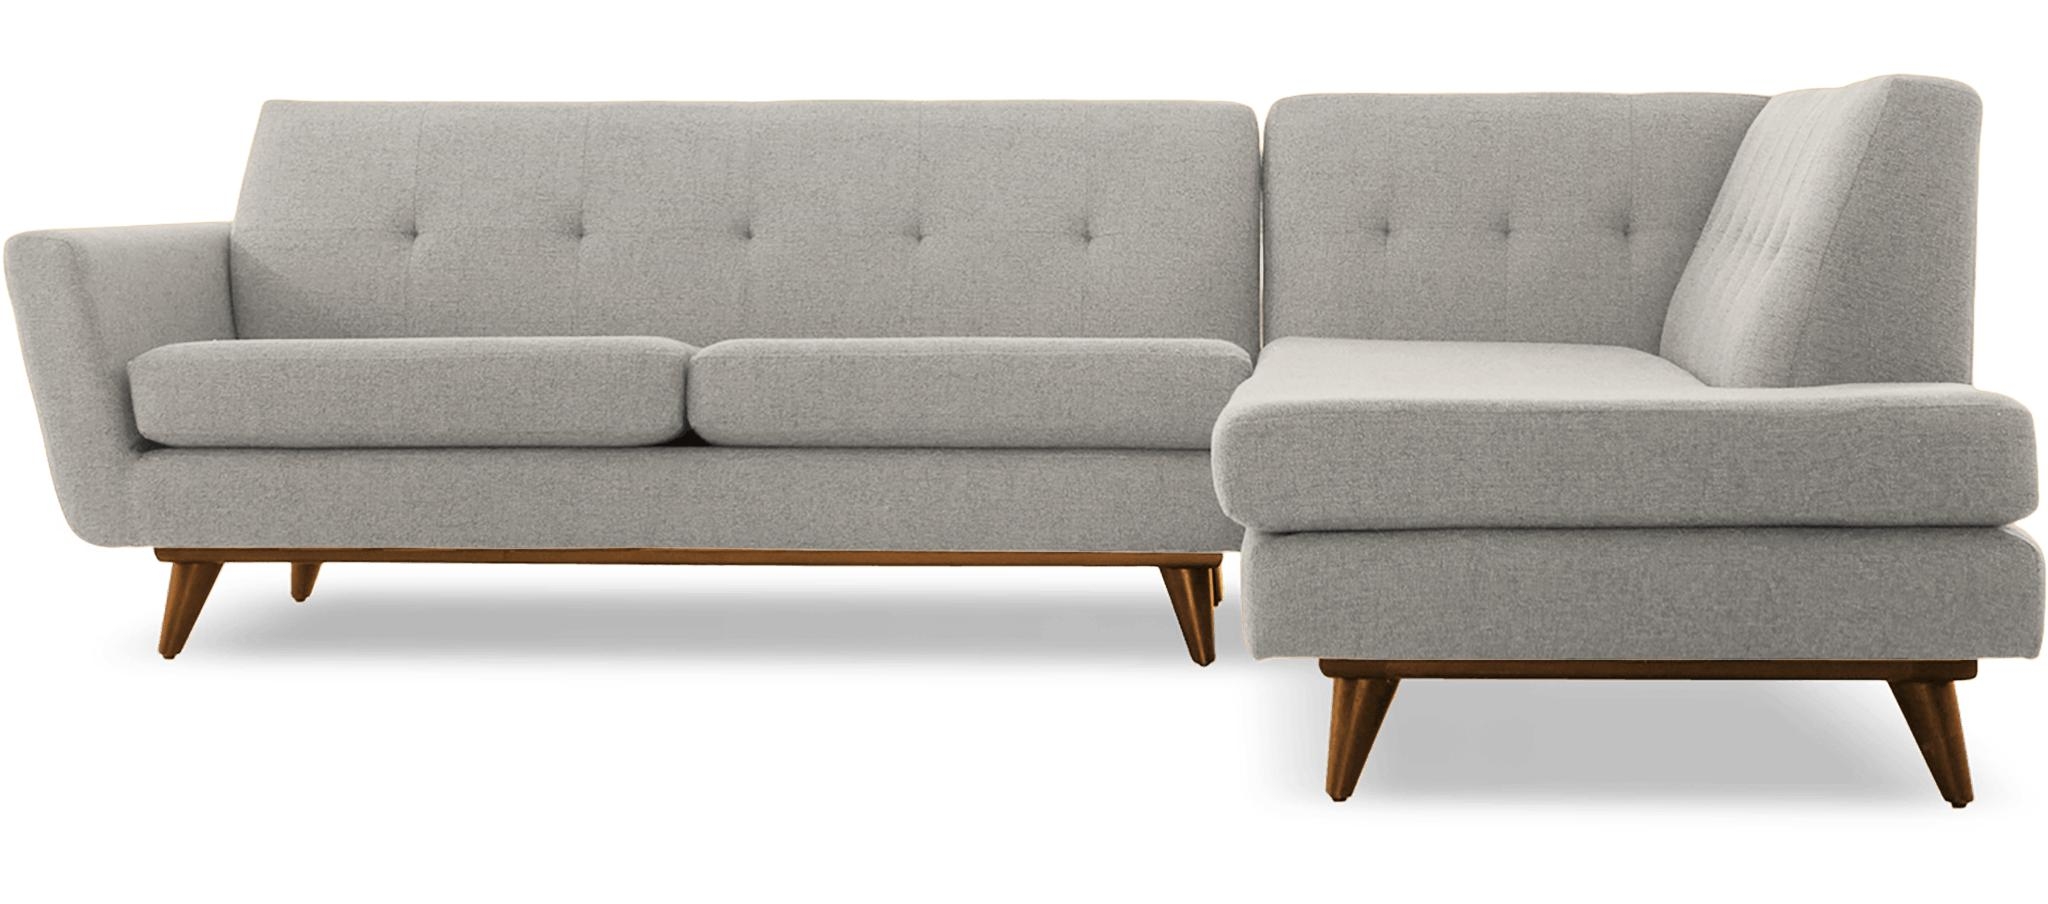 White Hughes Mid Century Modern Sectional with Bumper - Bloke Cotton - Mocha - Right  - Image 0